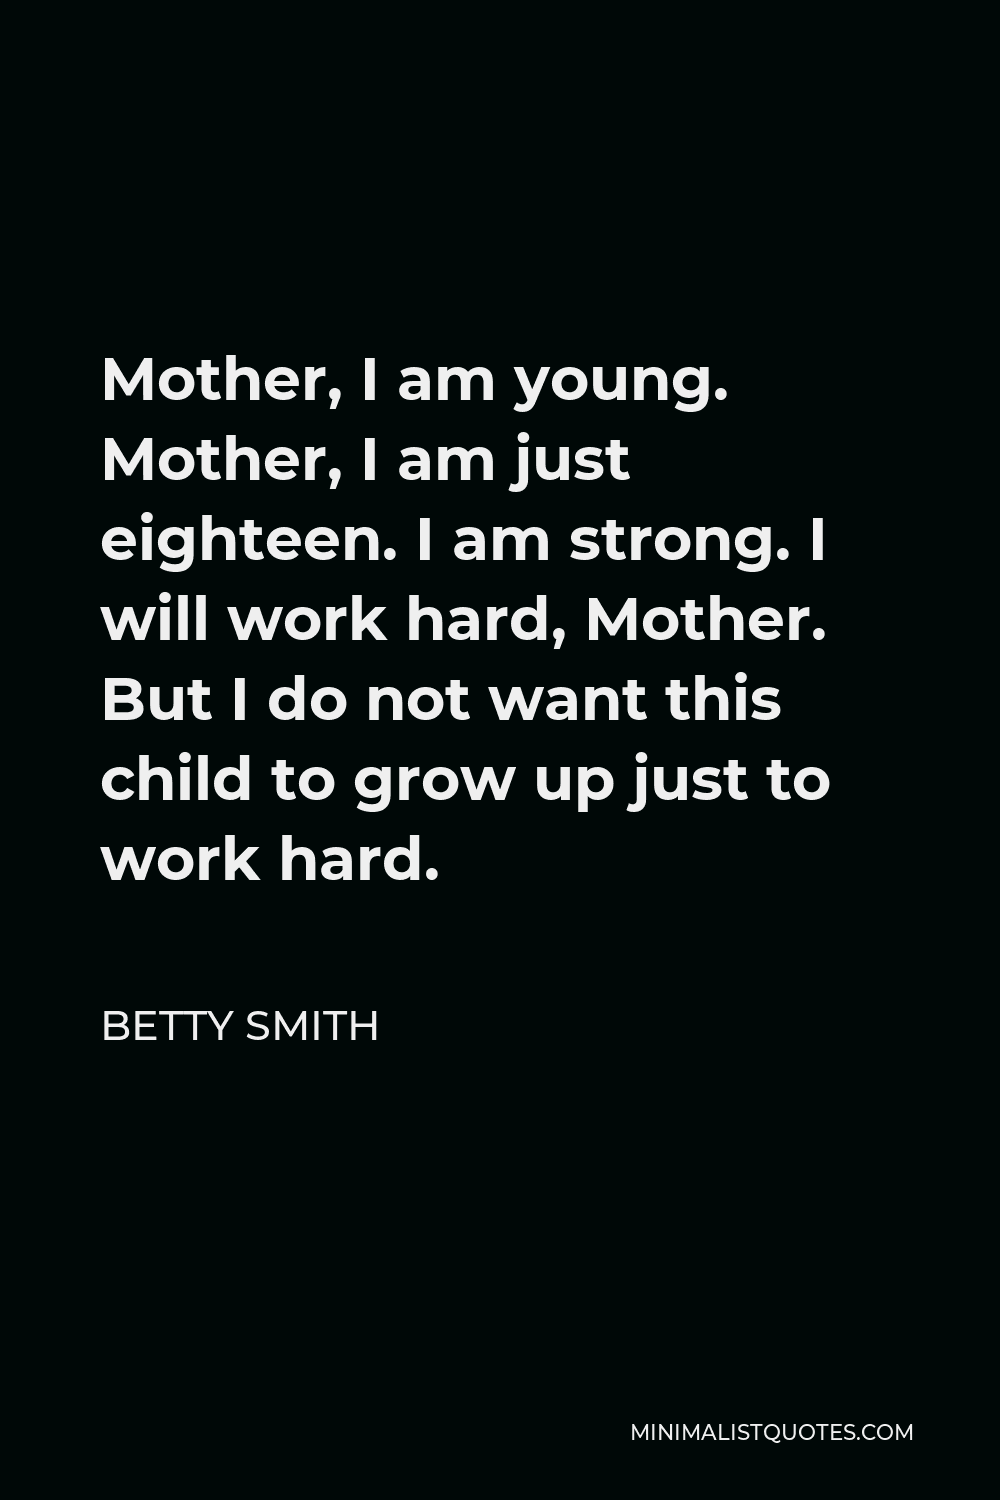 Betty Smith Quote - Mother, I am young. Mother, I am just eighteen. I am strong. I will work hard, Mother. But I do not want this child to grow up just to work hard.